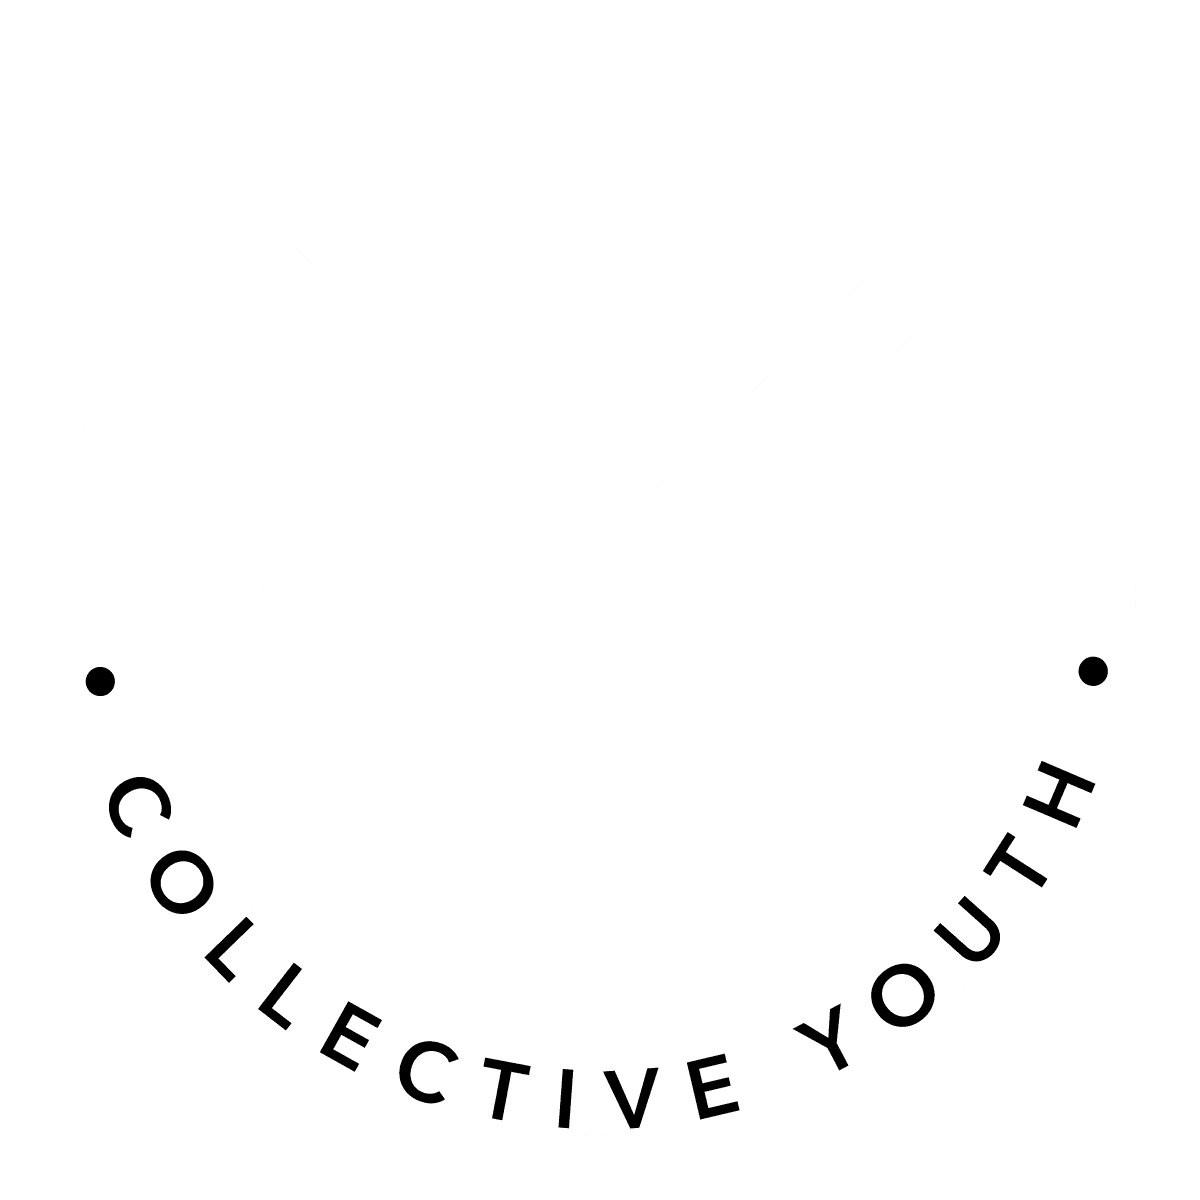 Collective Youth logo